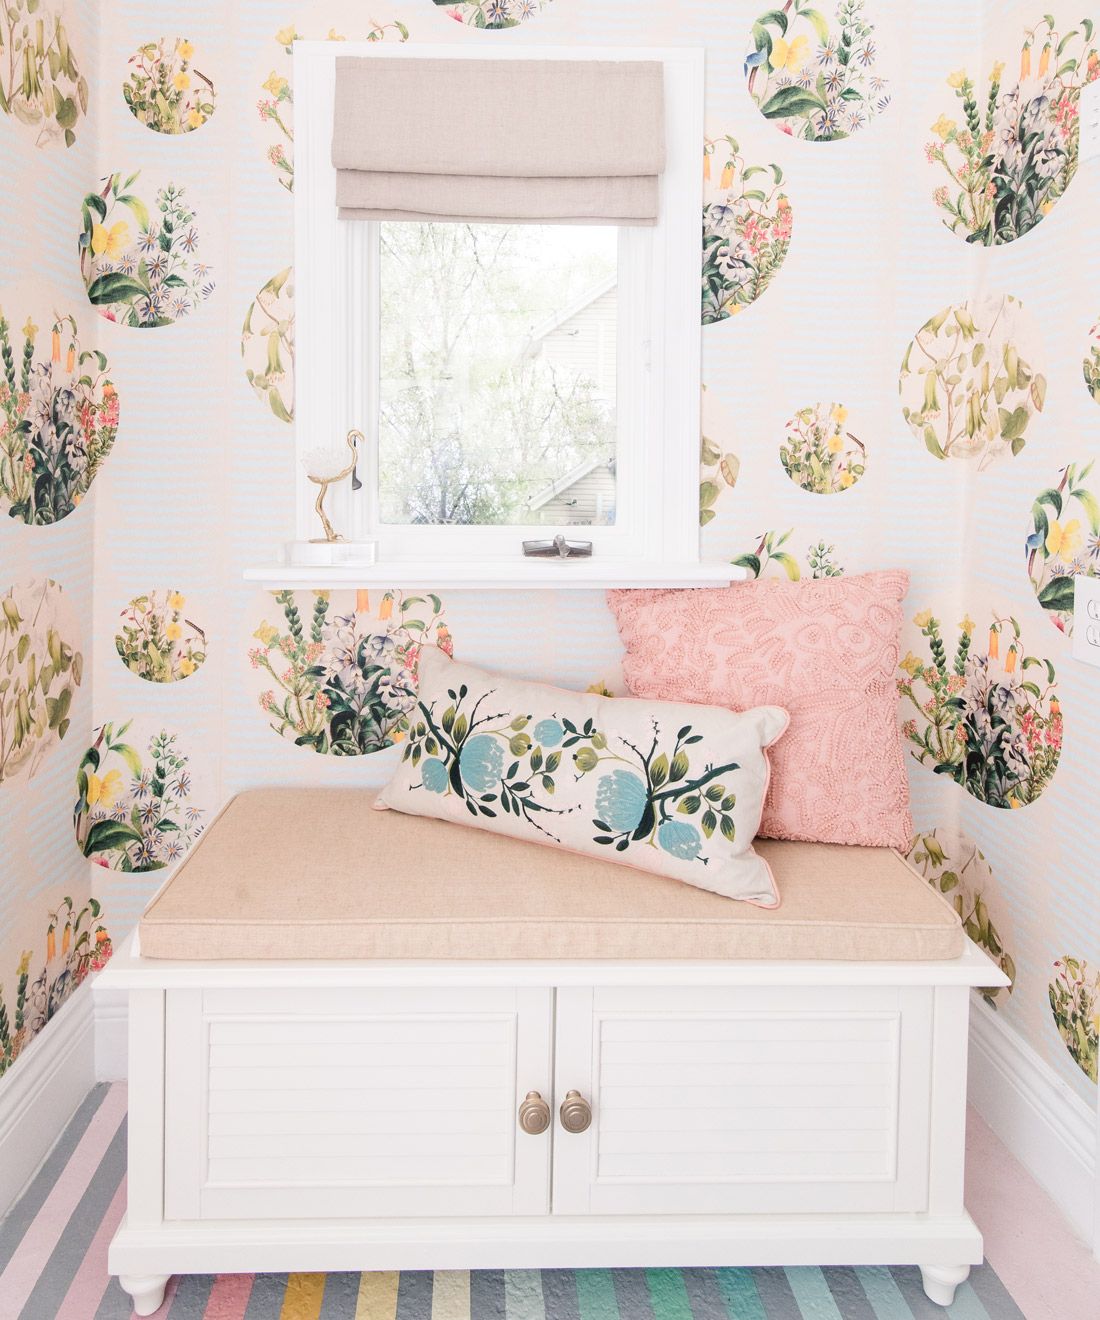 Euphemia 5 Wallpaper • Laundry Room Wallpaper • At Home With Ashley Wilson